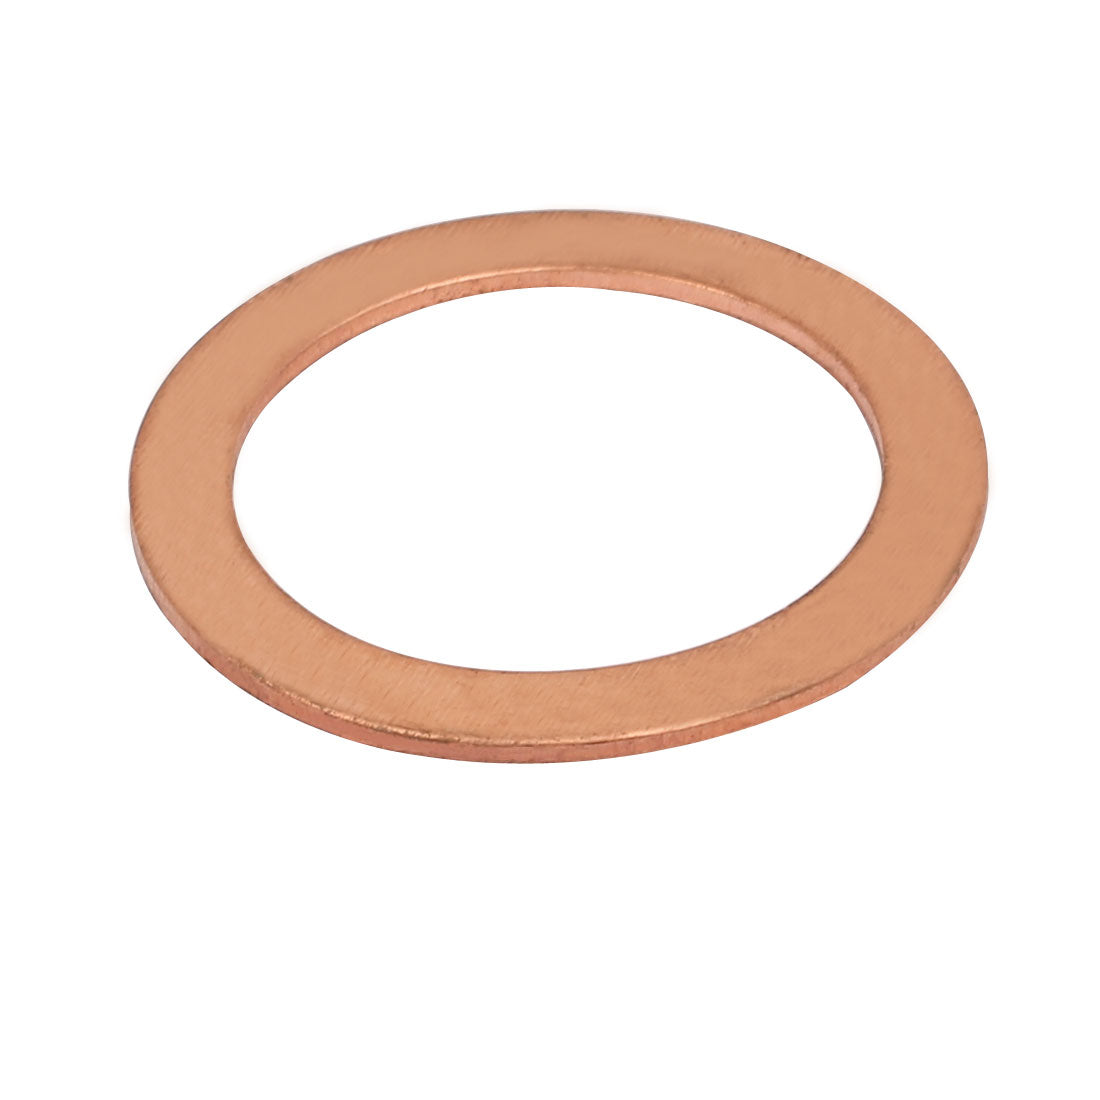 uxcell Uxcell 30mmx40mmx1.5mm Copper Flat Ring Sealing Crush Washer Gasket